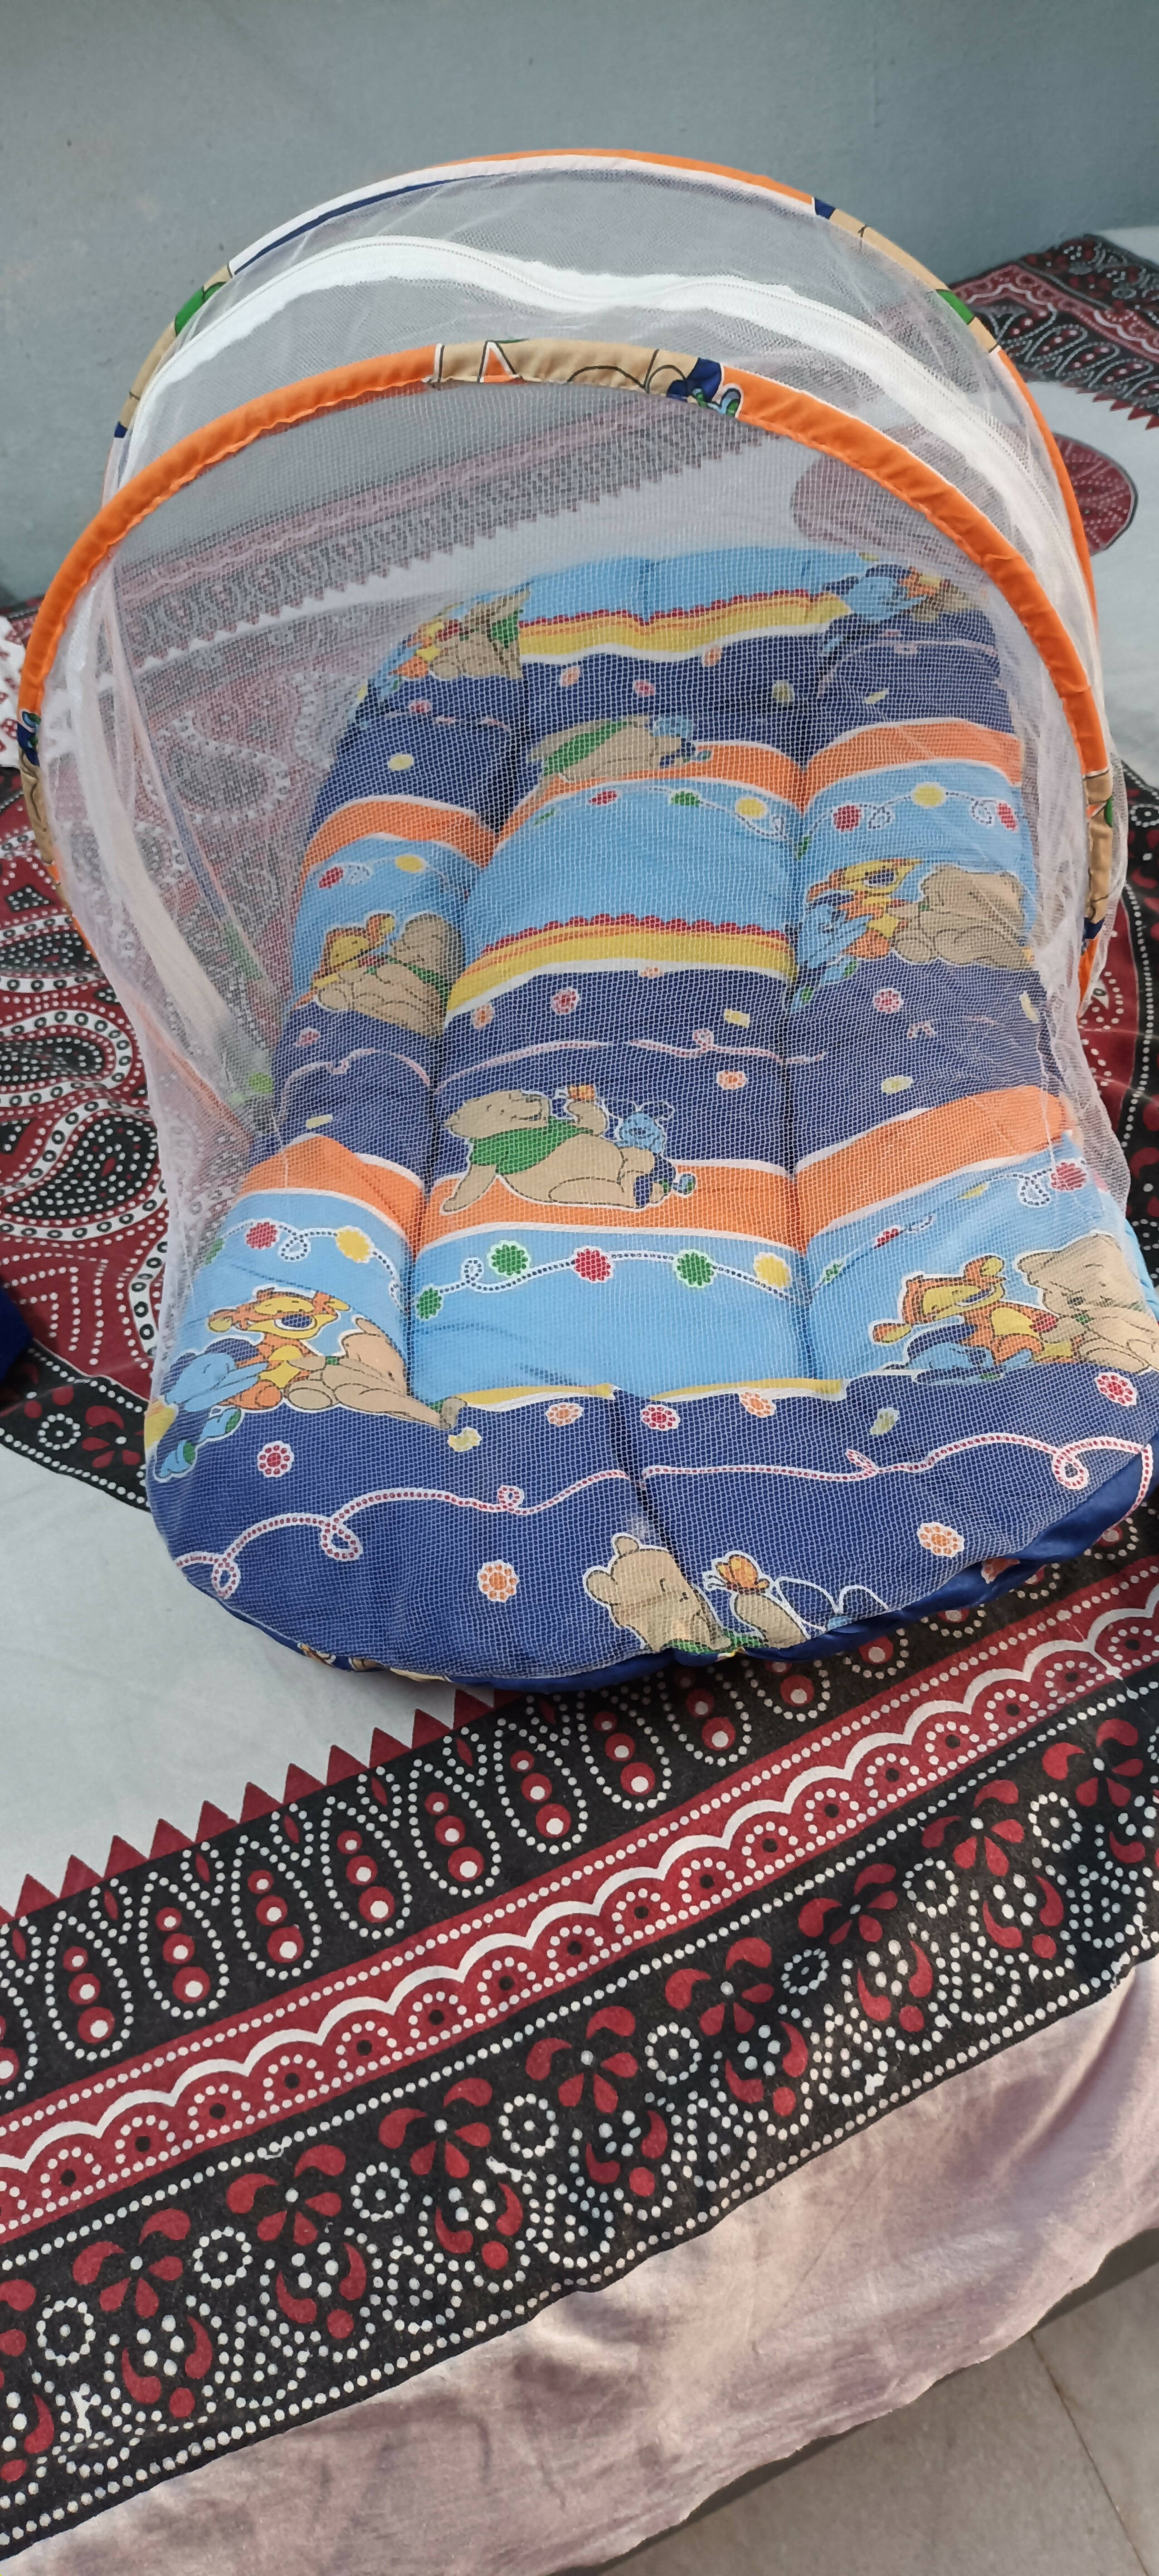 Baby bedding with mosquito net